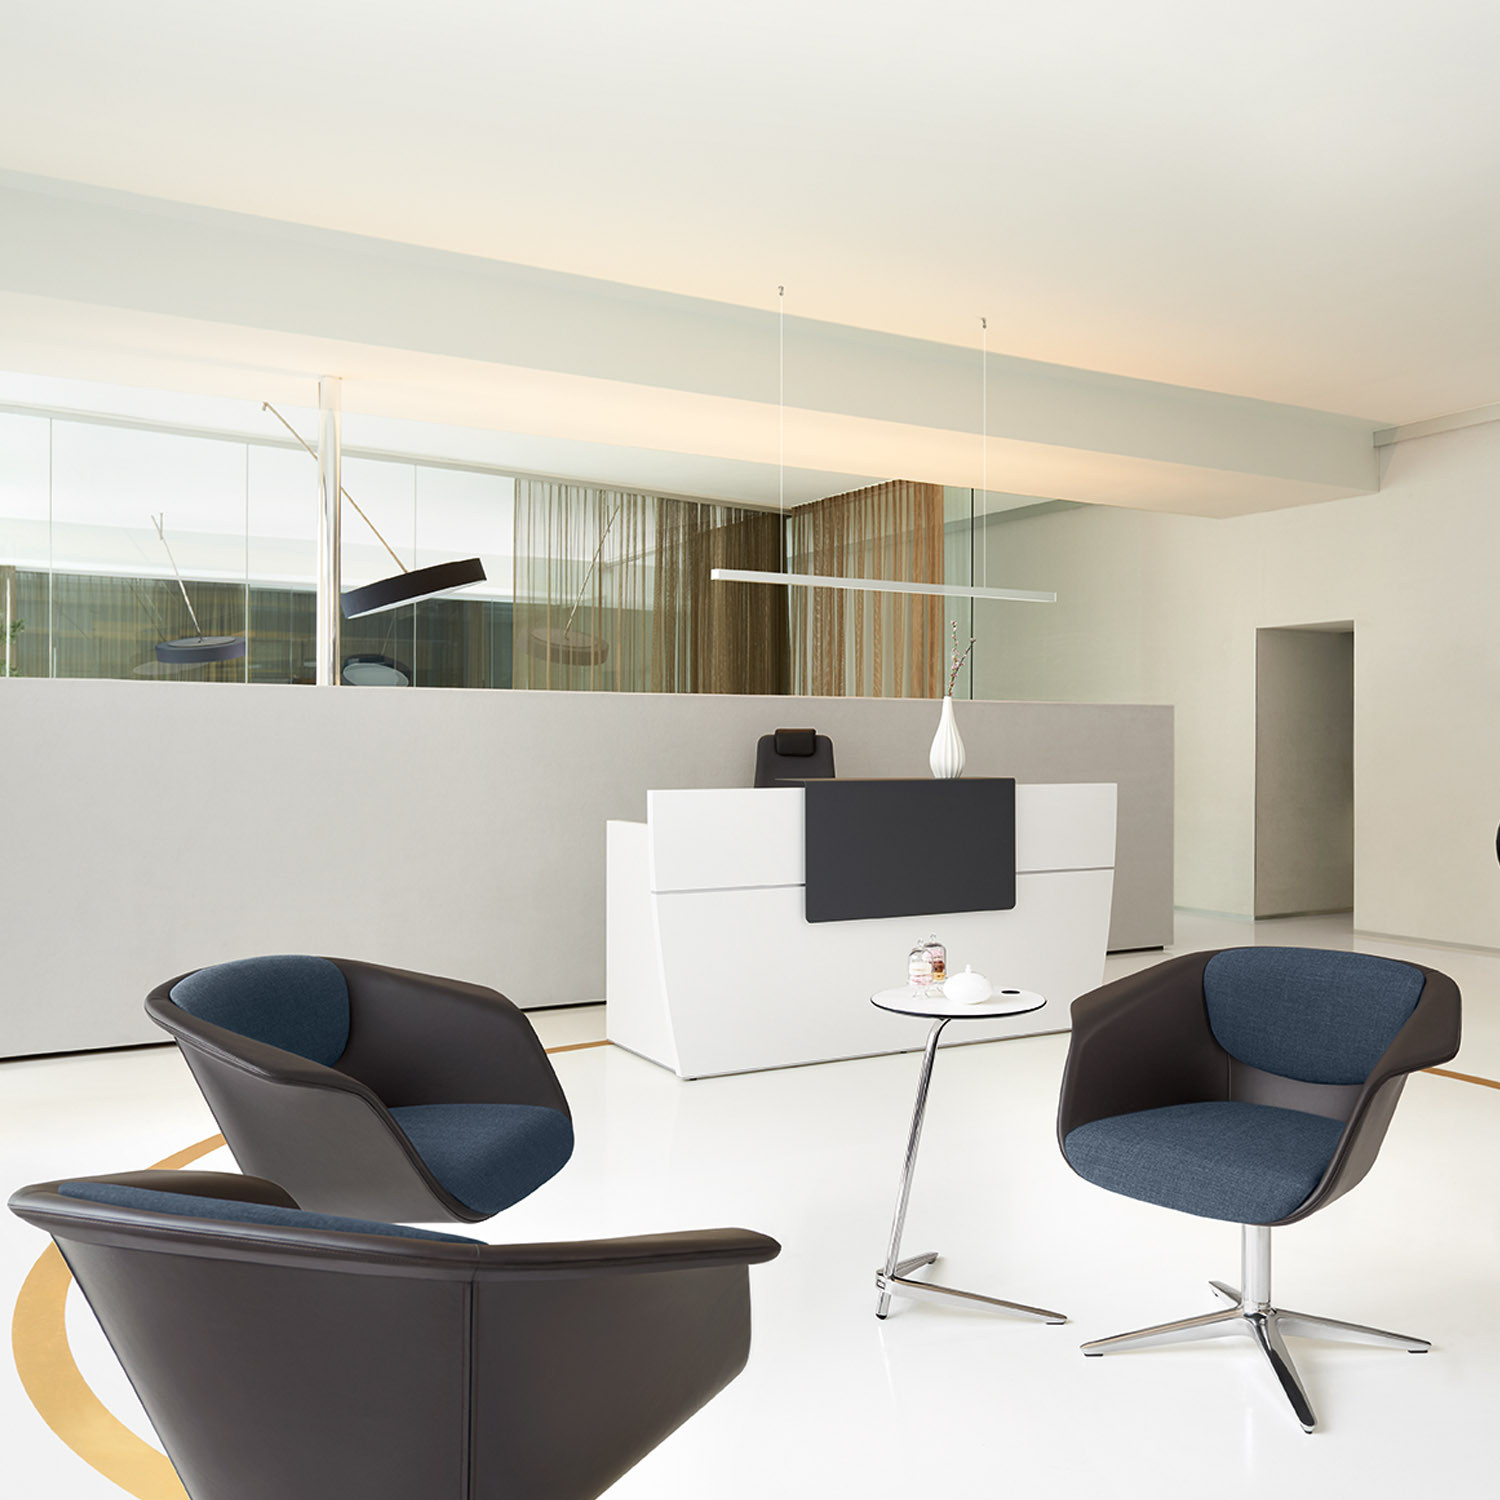 Sweetspot Laptop Table and lounge chairs in reception